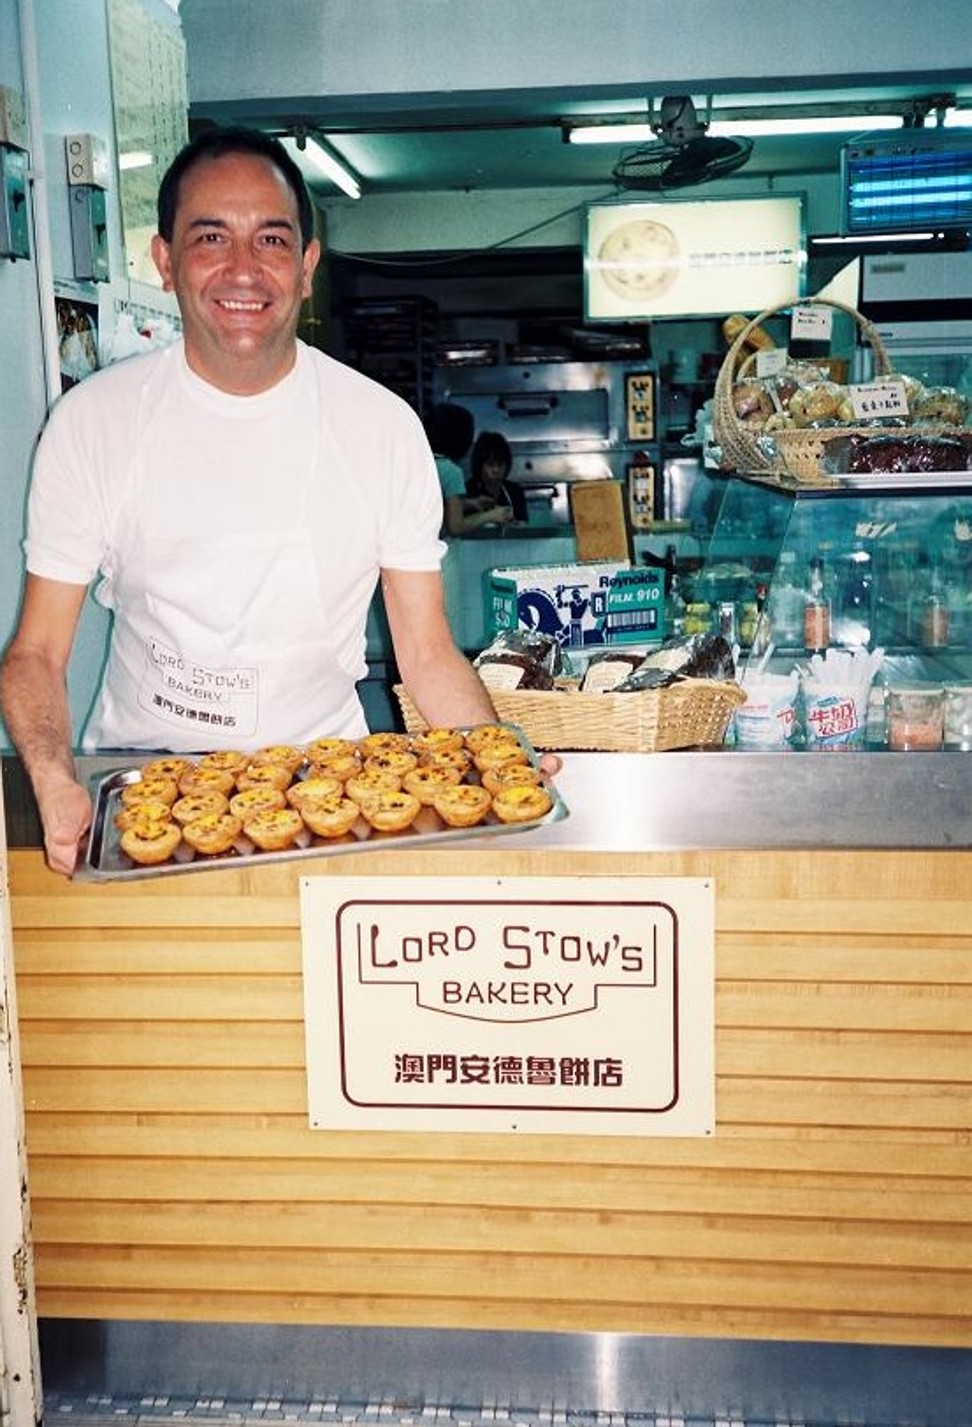 Andrew Stow with egg tarts created using his own recipe.